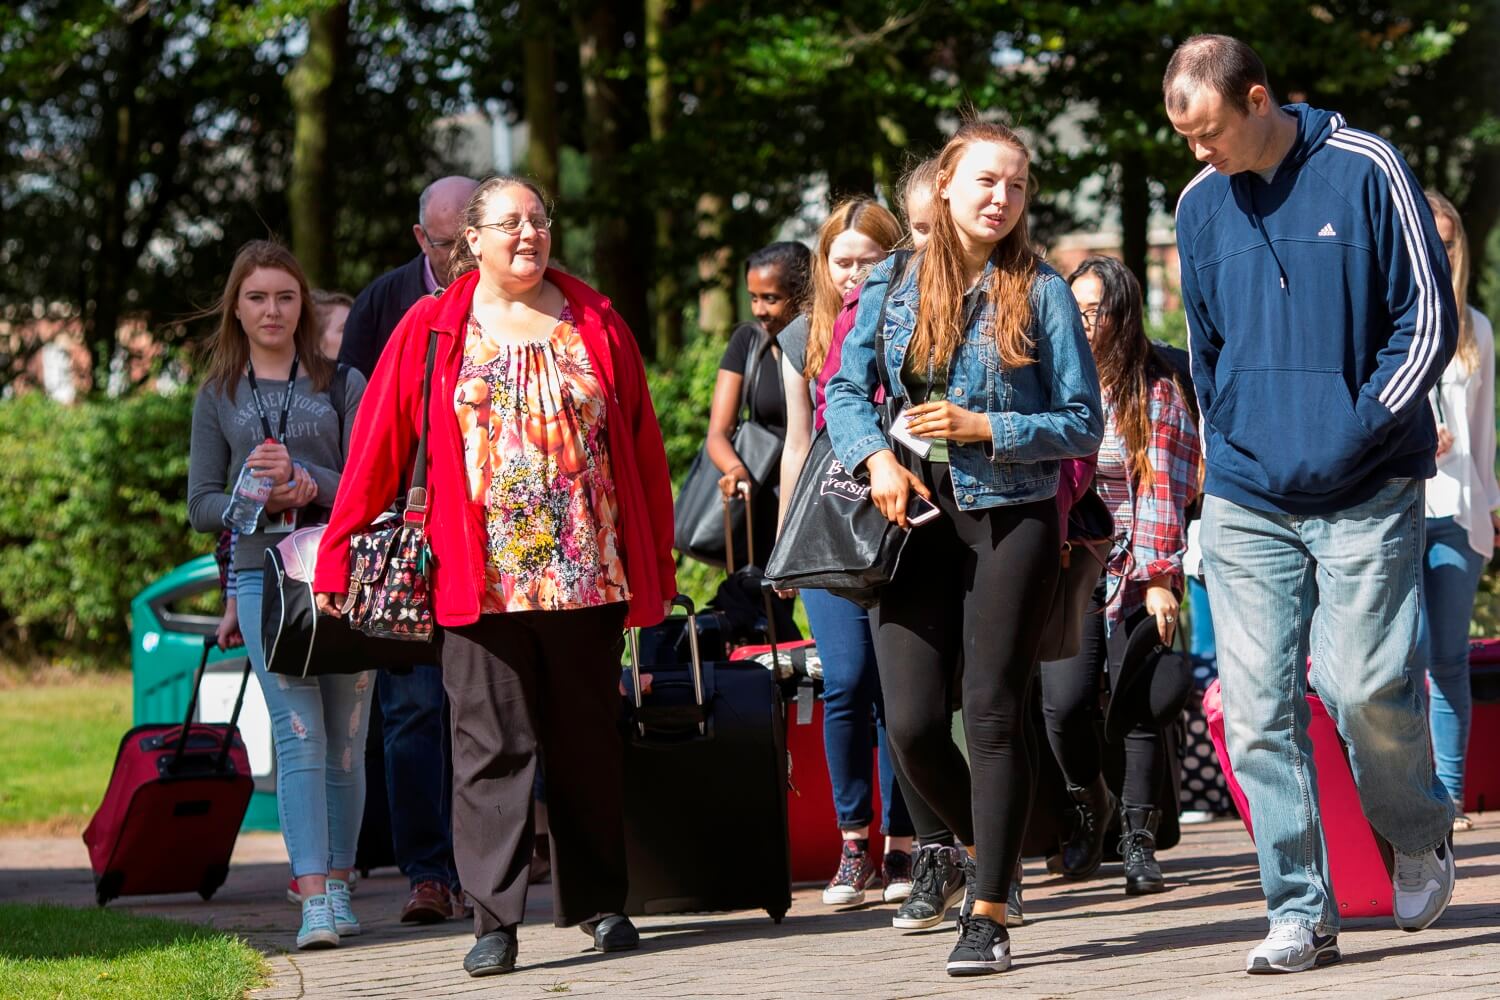 Year 12 Residential participants walk with their suitcases across campus as they prepare to move into a hall of residence at the start of the four-day event.